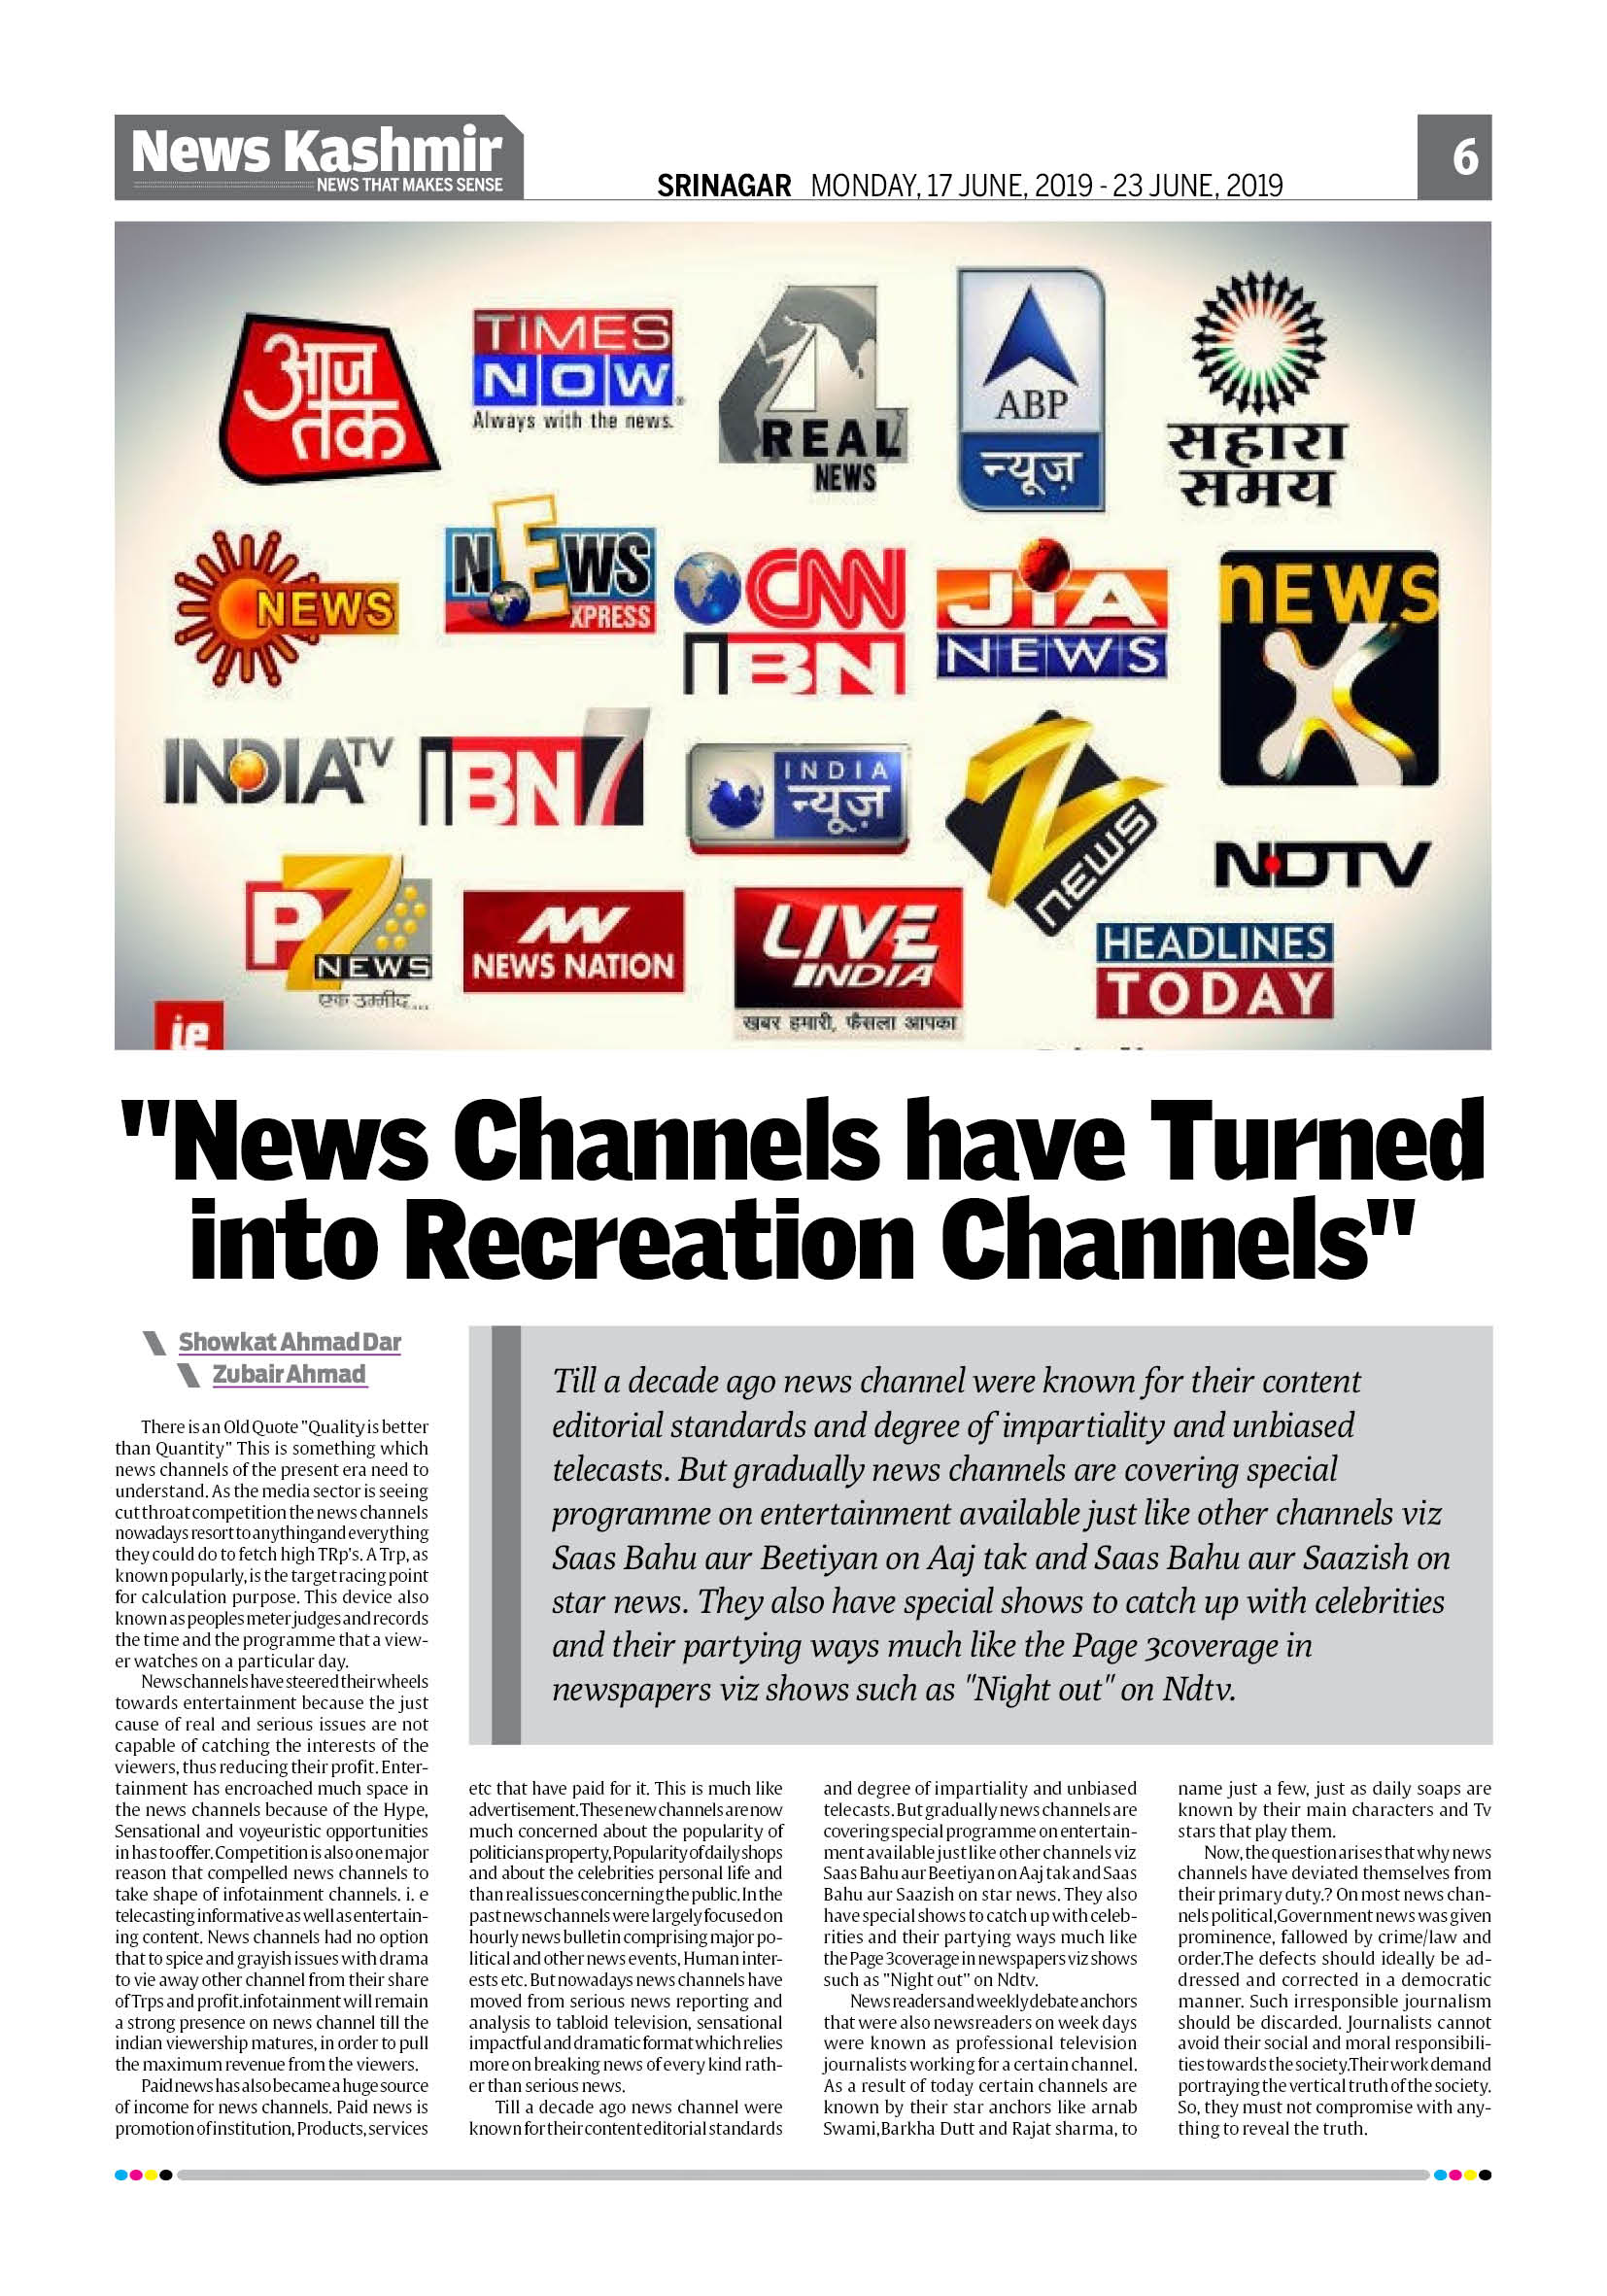 “News Channels have Turned into Recreation Channels “